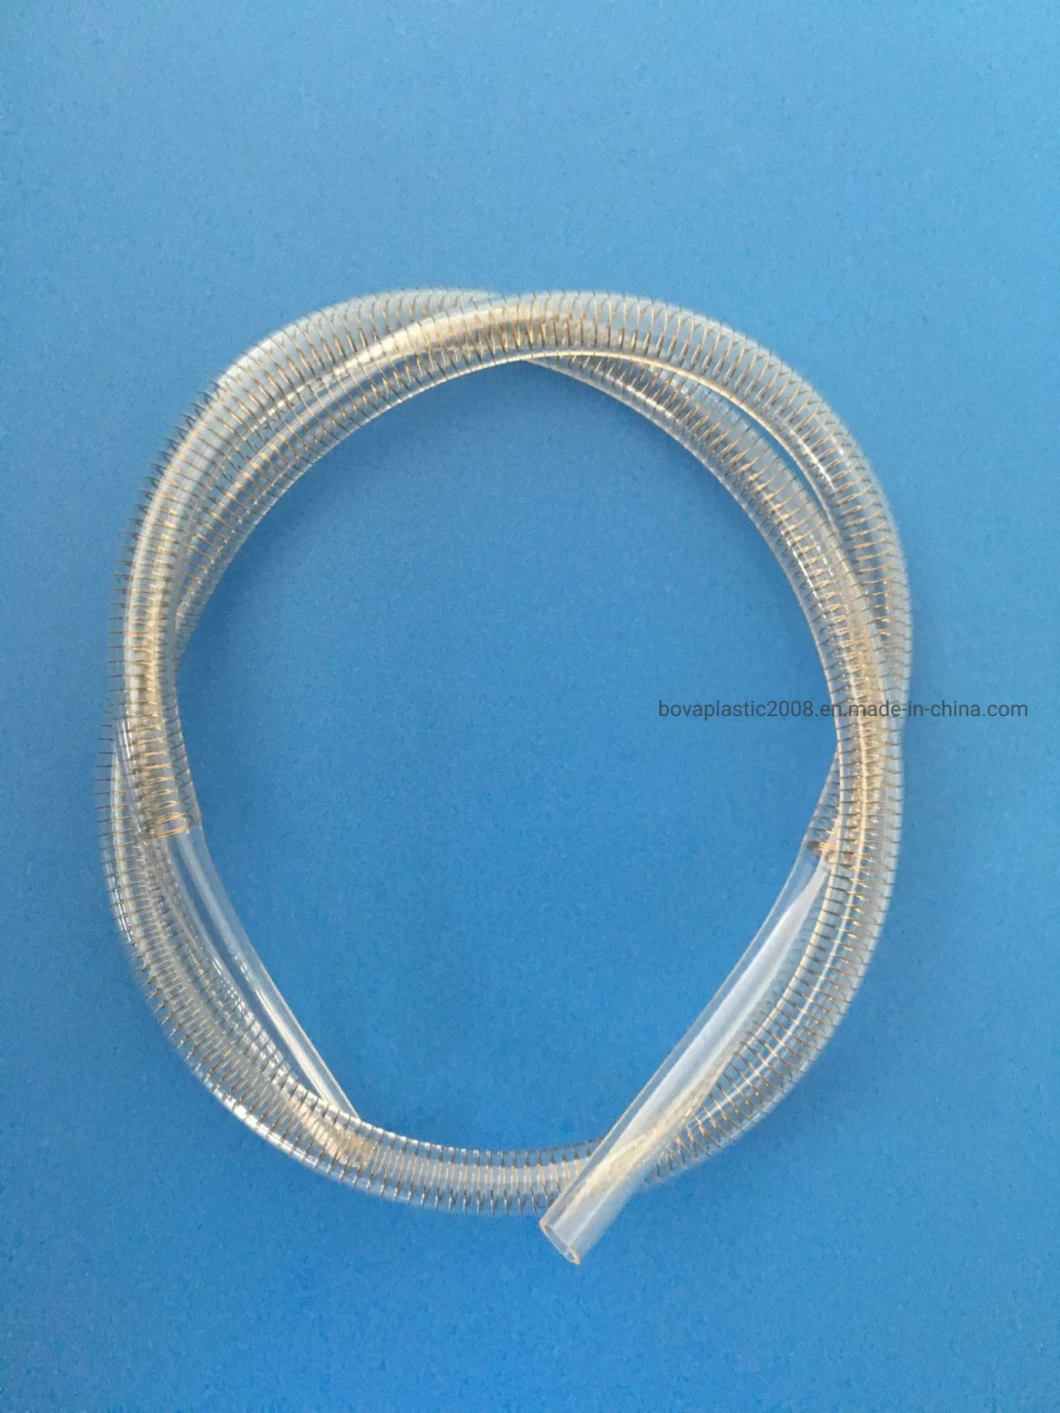 China Professional Manufacture of Graving Use Fluid Blood Infusion Set Catheter